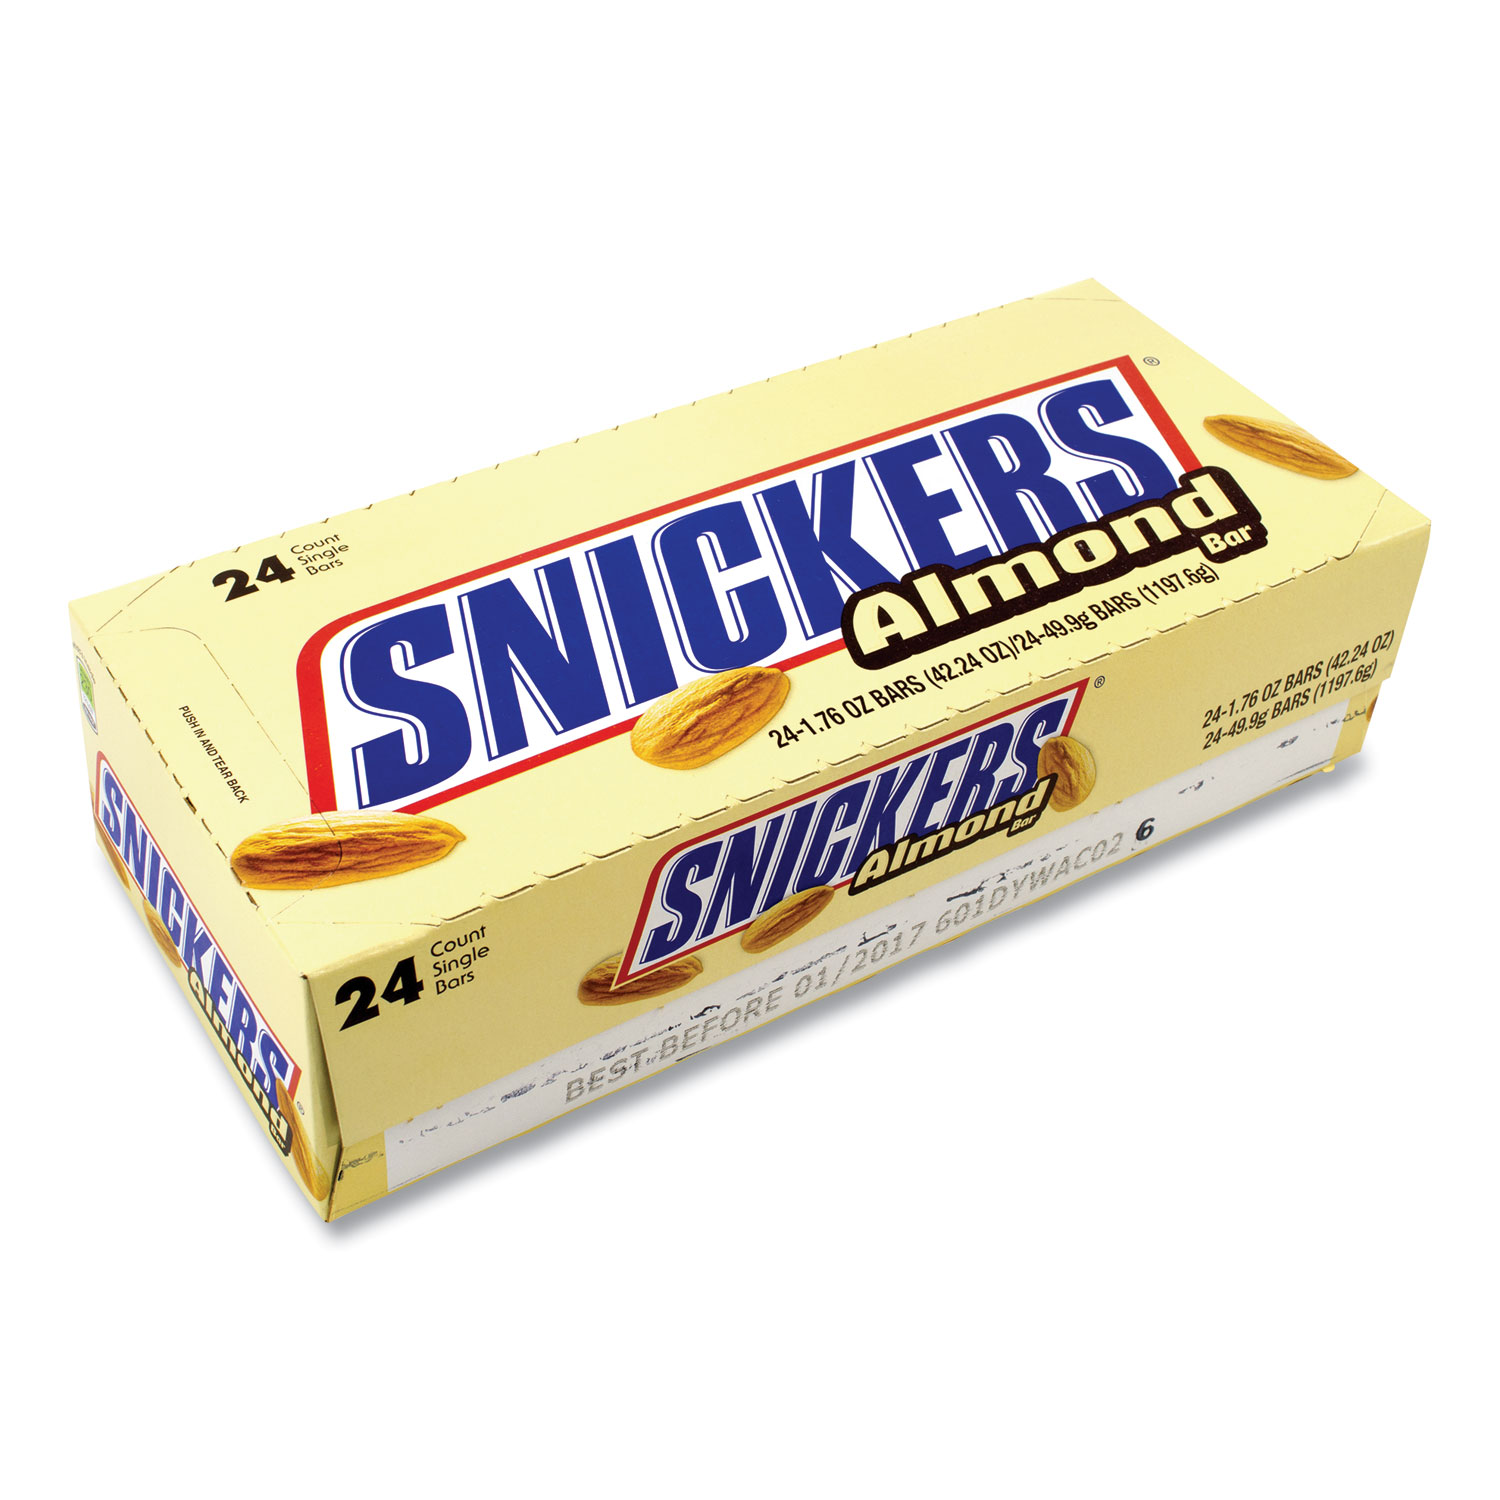  Snickers 1105 Almond Bar, 1.76 oz Bar, 24 Bars/Box, Free Delivery in 1-4 Business Days (GRR20902448) 